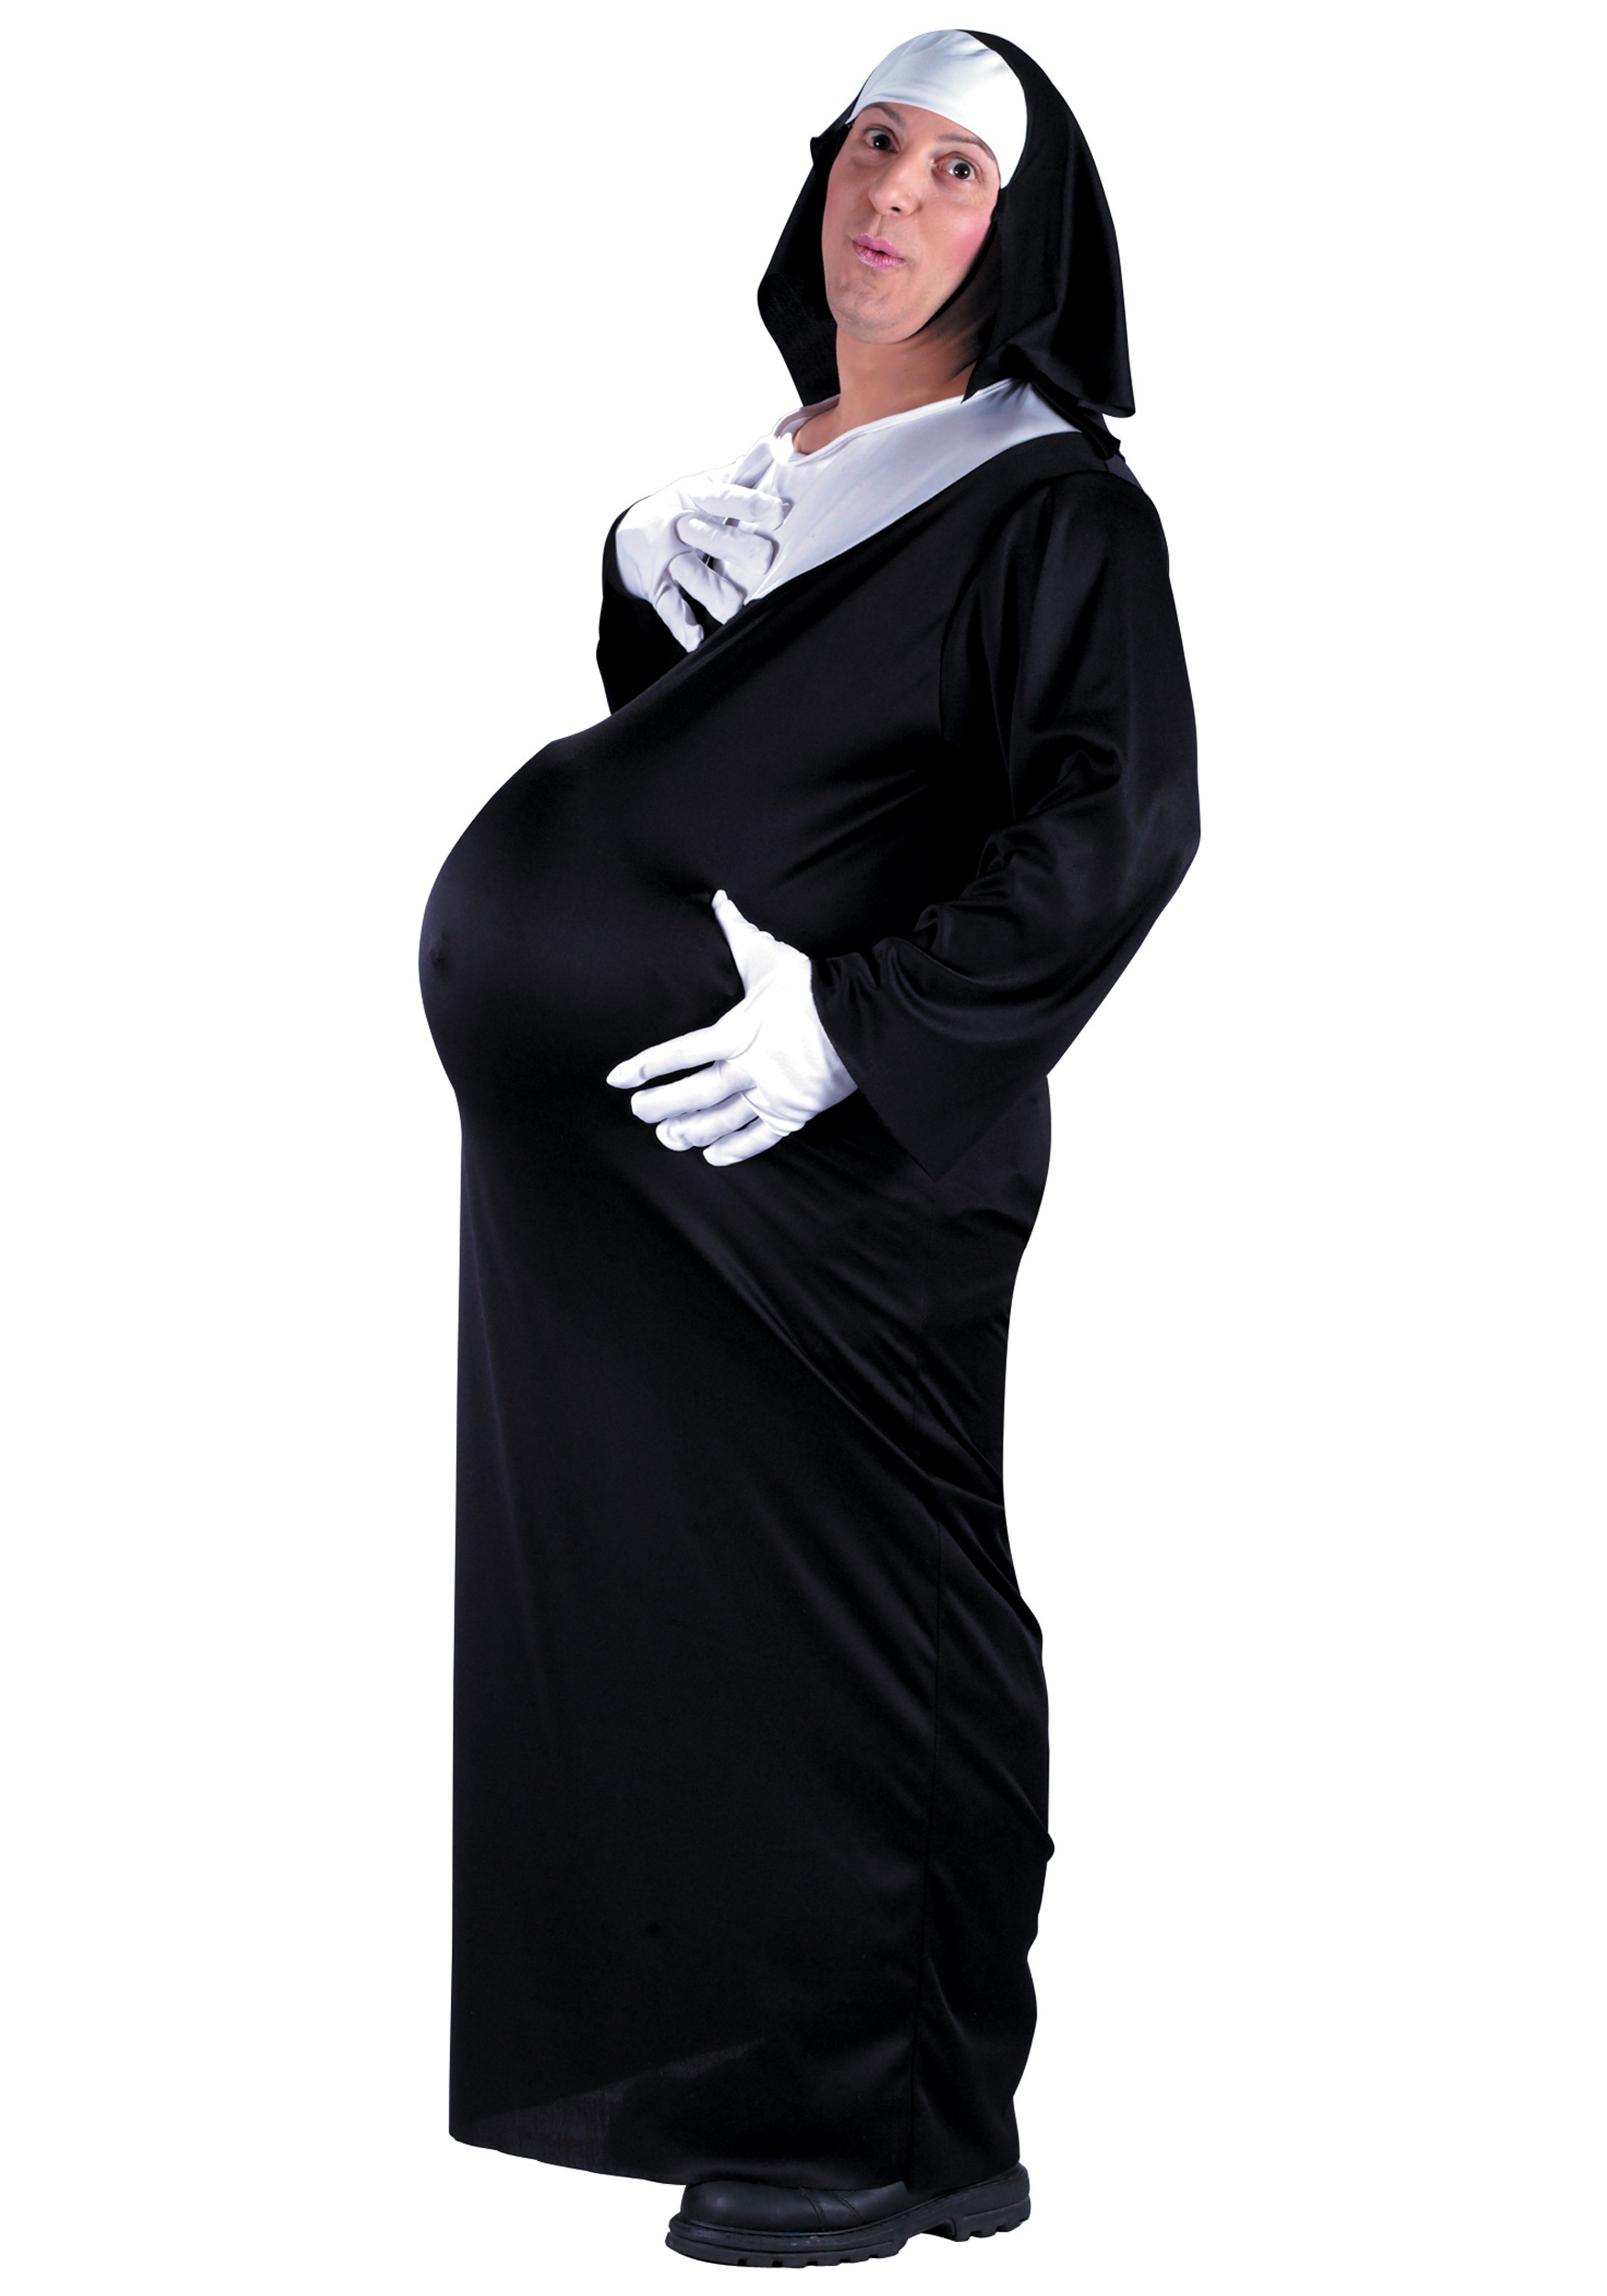 funny priest and nun costumes hot photo